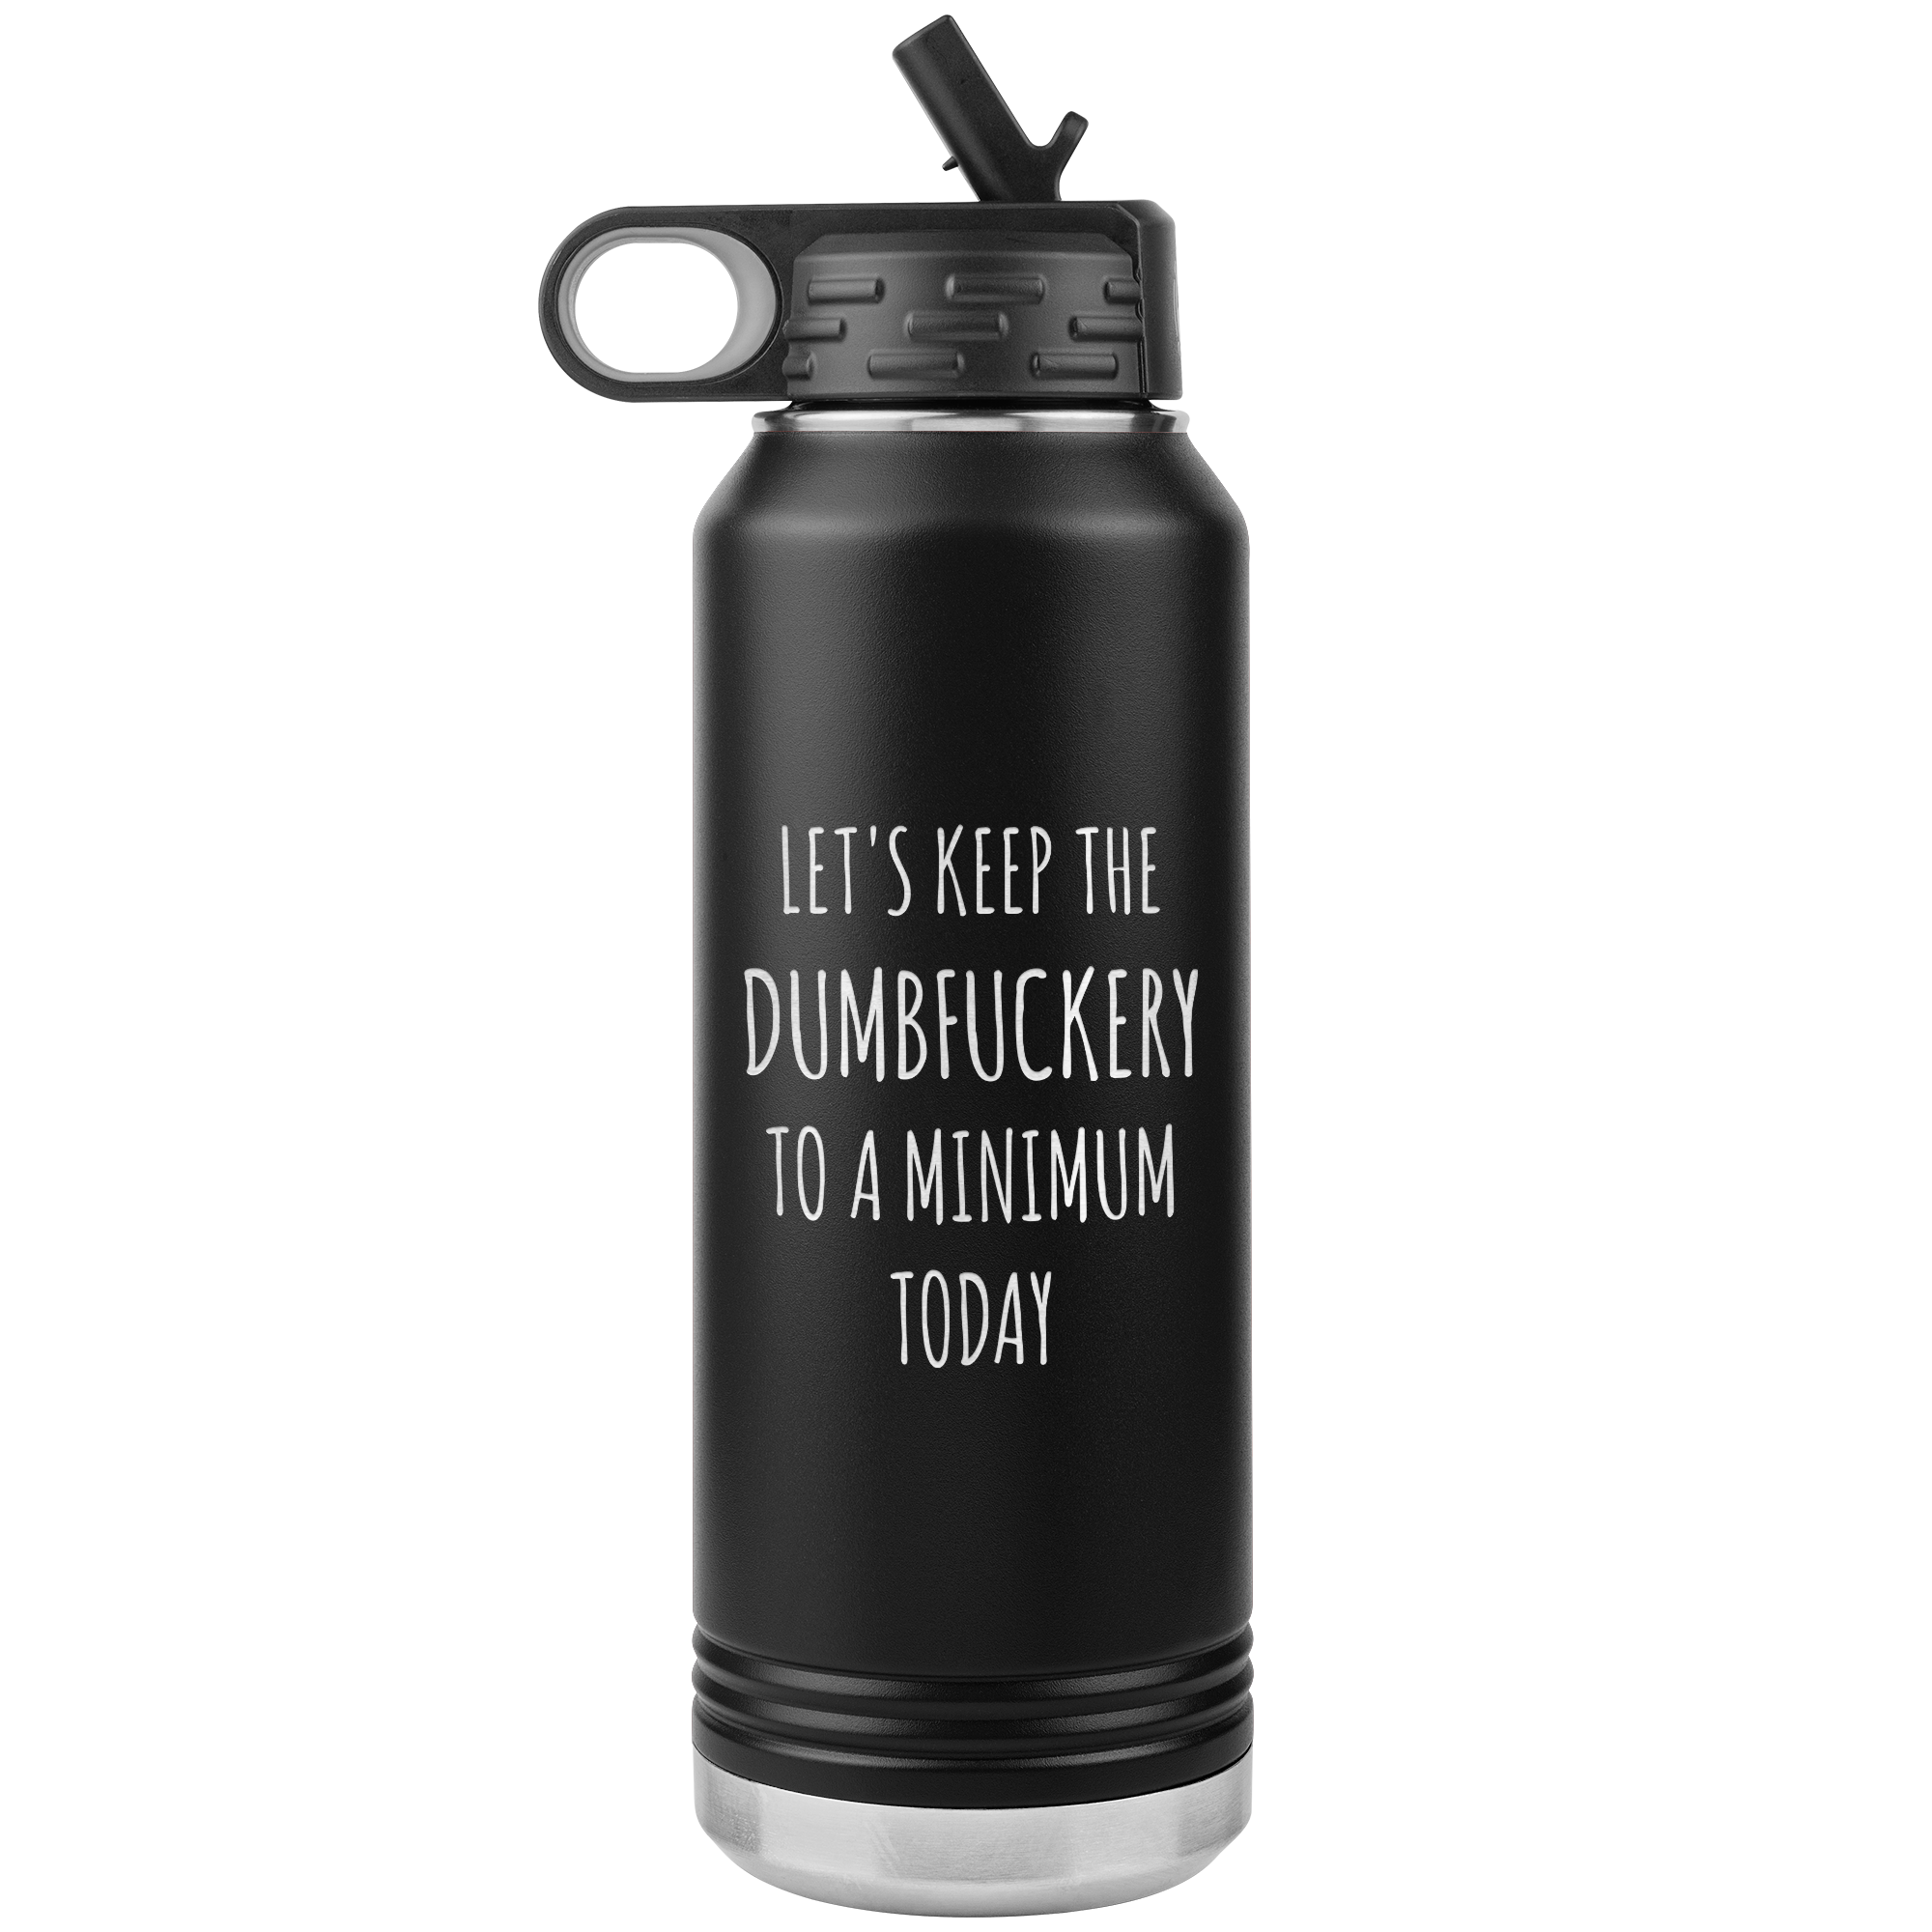 Let's Keep the Dumbfuckery to a Minimum Today Funny Office Work Coworker Gift Insulated Water Bottle 32oz BPA Free